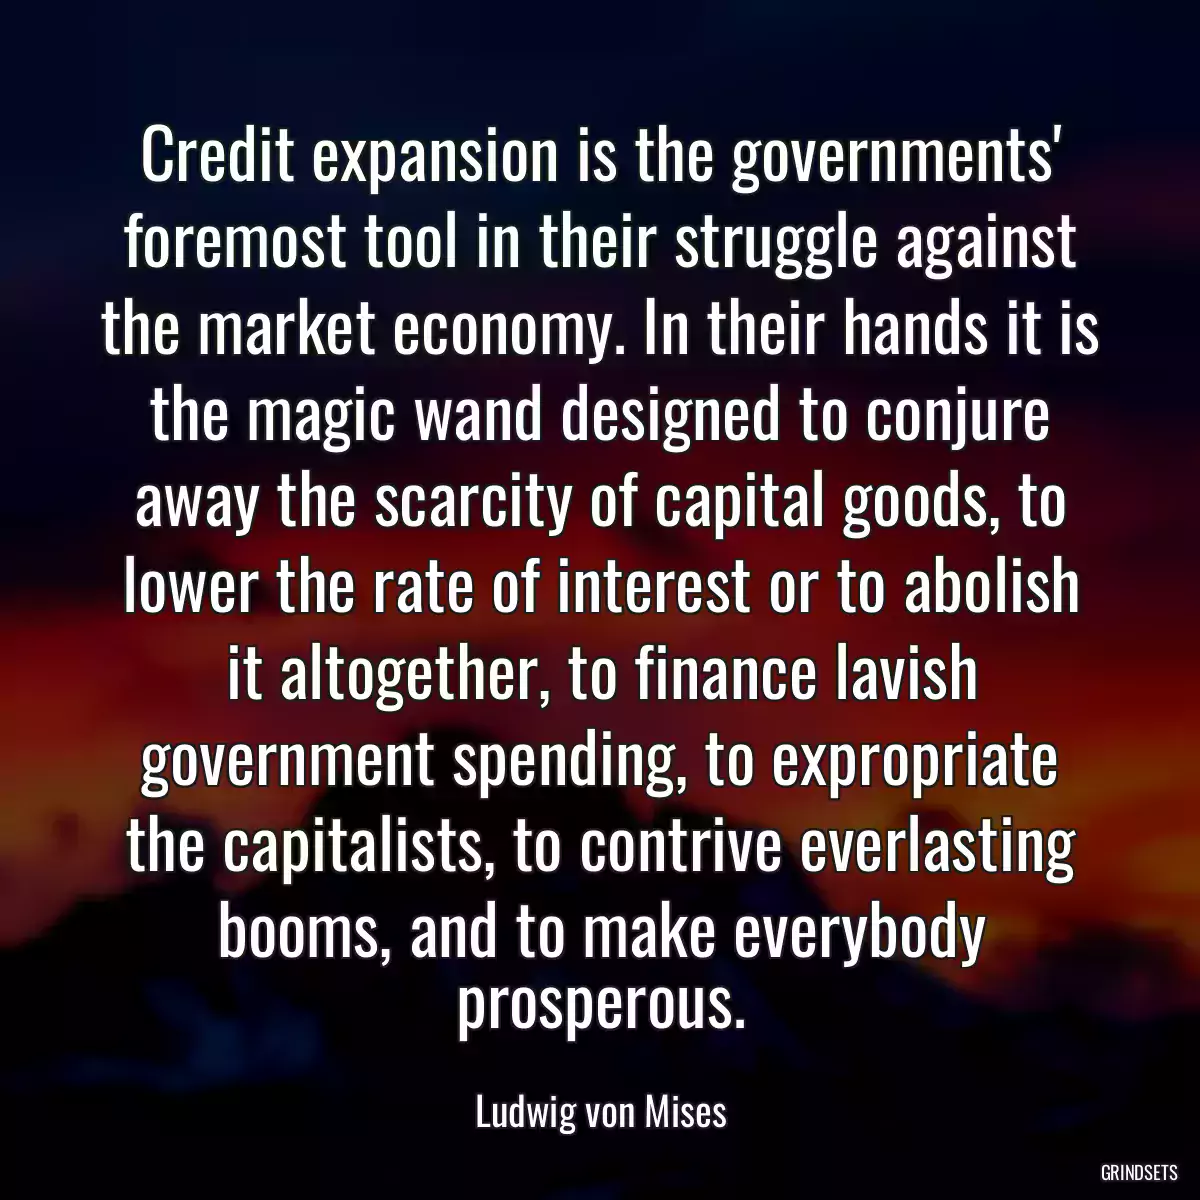 Credit expansion is the governments\' foremost tool in their struggle against the market economy. In their hands it is the magic wand designed to conjure away the scarcity of capital goods, to lower the rate of interest or to abolish it altogether, to finance lavish government spending, to expropriate the capitalists, to contrive everlasting booms, and to make everybody prosperous.